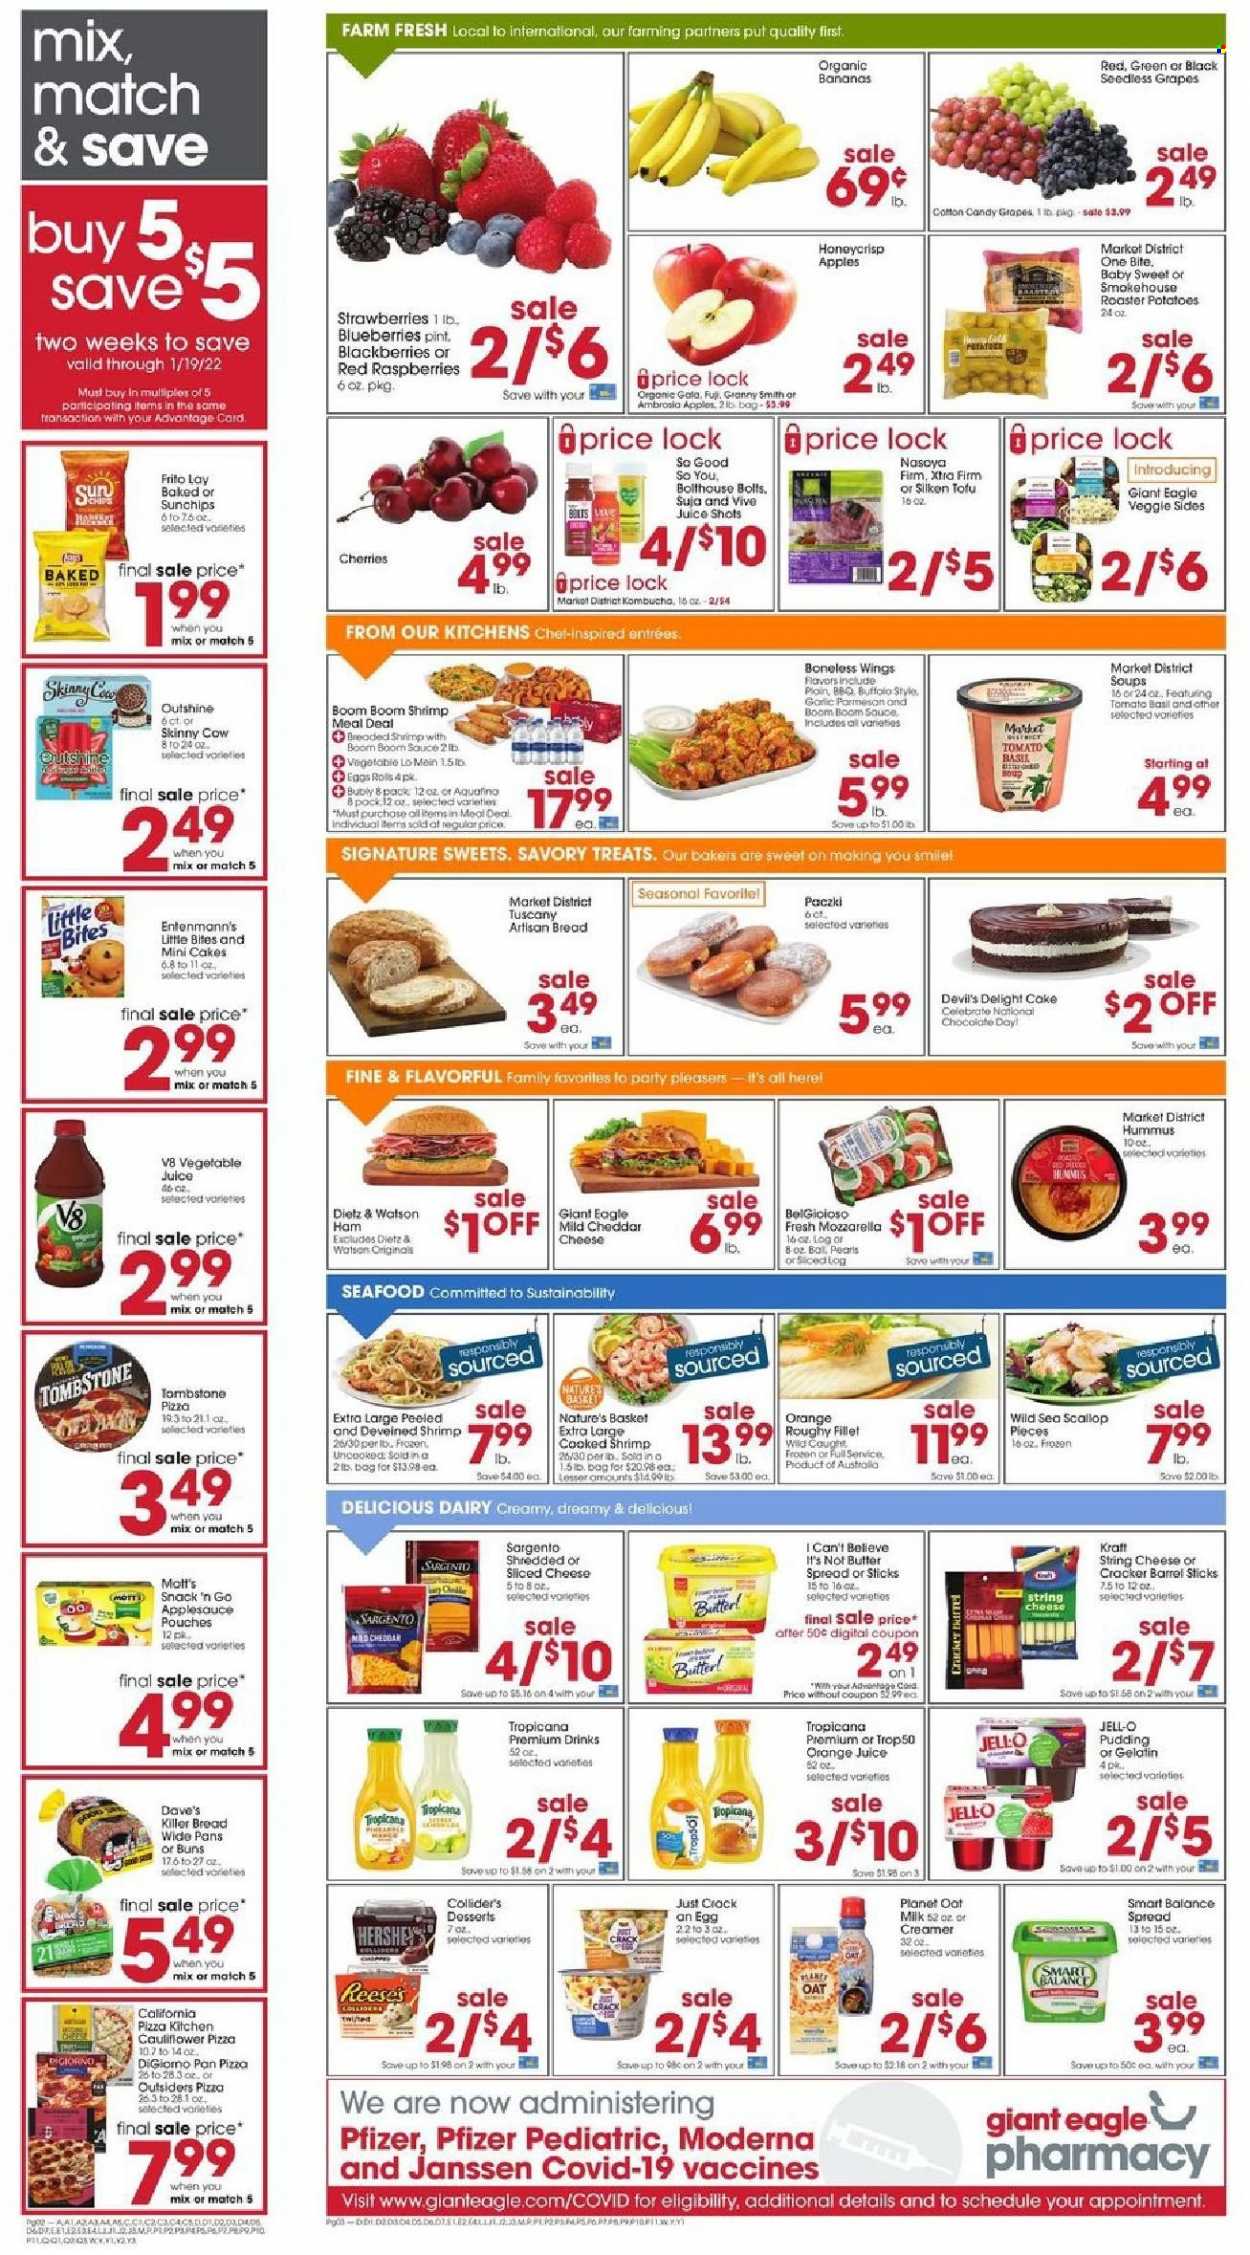 thumbnail - Giant Eagle Flyer - 01/06/2022 - 01/12/2022 - Sales products - seedless grapes, organic bananas, bread, cake, buns, paczki, Entenmann's, potatoes, bananas, blackberries, blueberries, Gala, grapes, strawberries, cherries, oranges, Granny Smith, Mott's, scallops, seafood, shrimps, pizza, sauce, Kraft®, ham, Dietz & Watson, hummus, mild cheddar, sliced cheese, string cheese, Sargento, pudding, milk, oat milk, butter, creamer, Reese's, Hershey's, chocolate, snack, crackers, Little Bites, Jell-O, apple sauce, juice, vegetable juice, So Good So You, kombucha, XTRA, basket, pan, Bakers. Page 2.